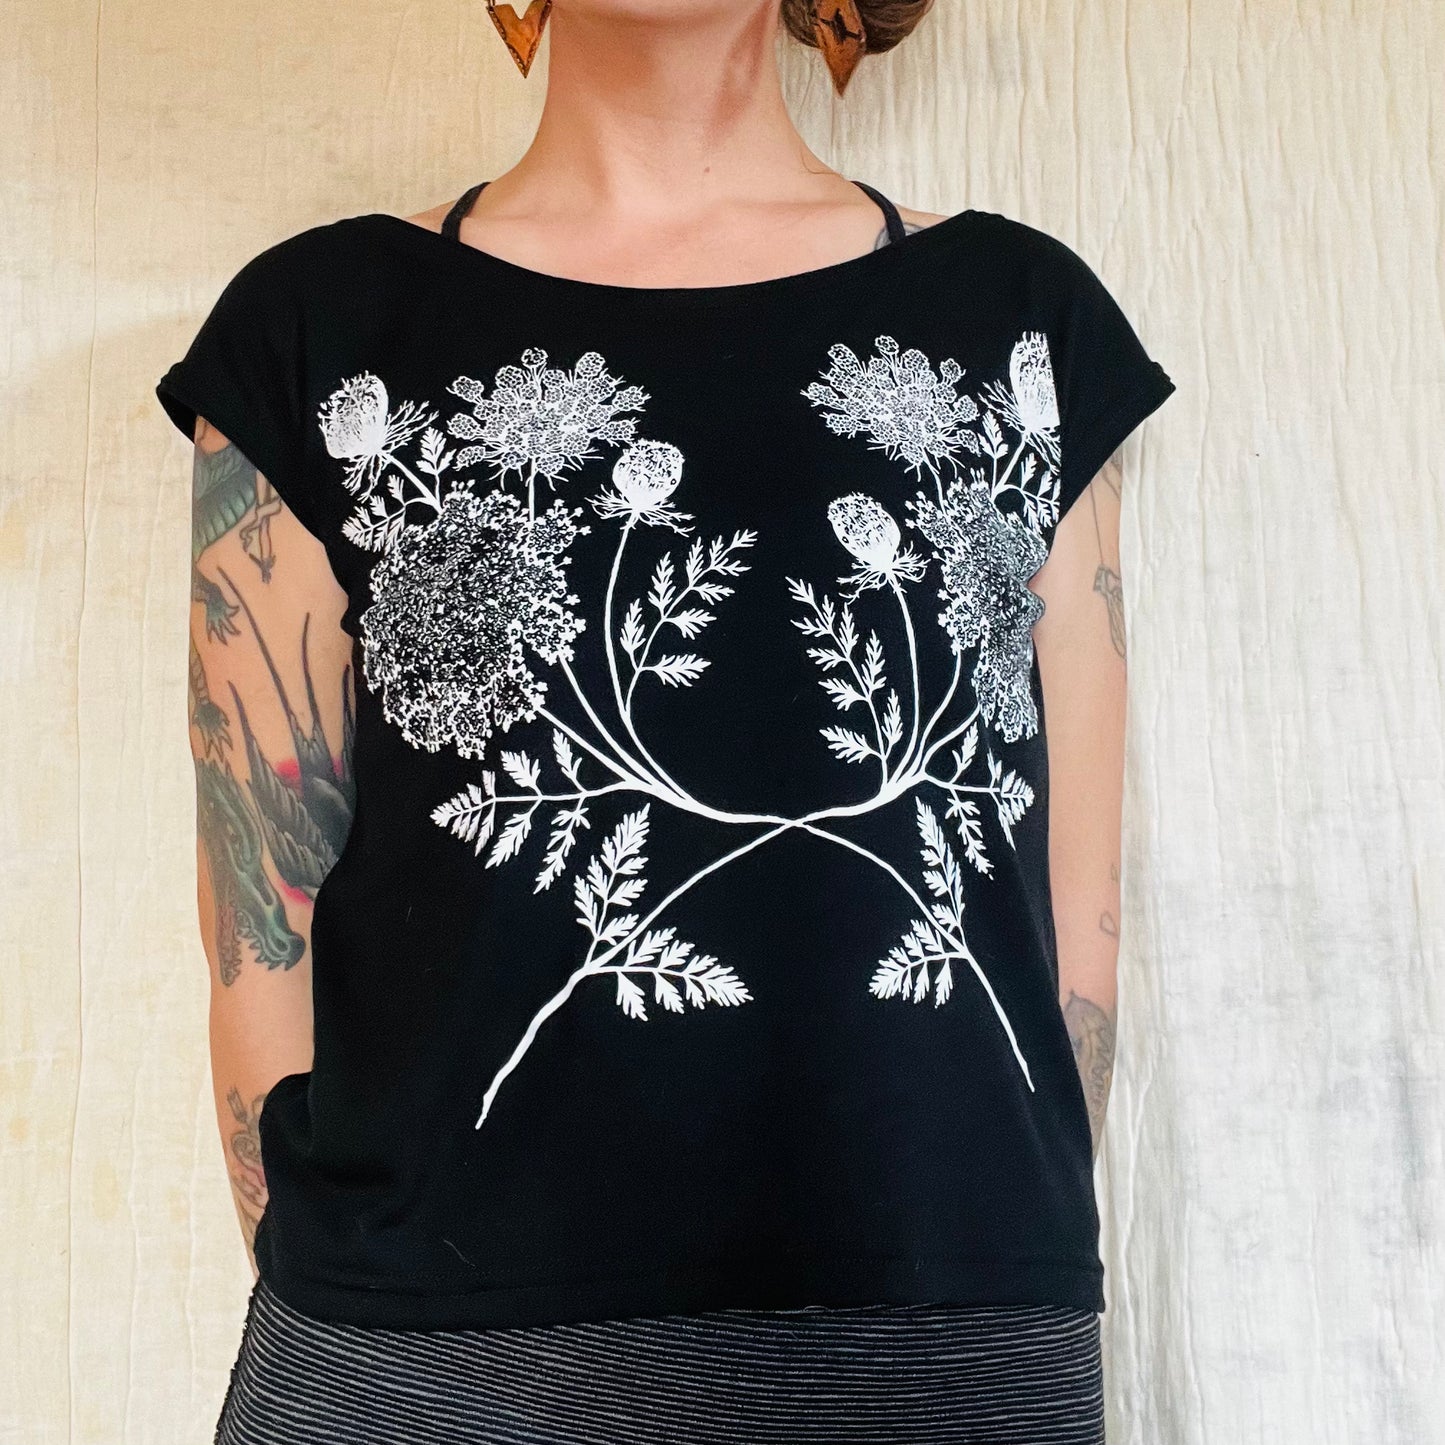 Queen Annes Lace Easy Top